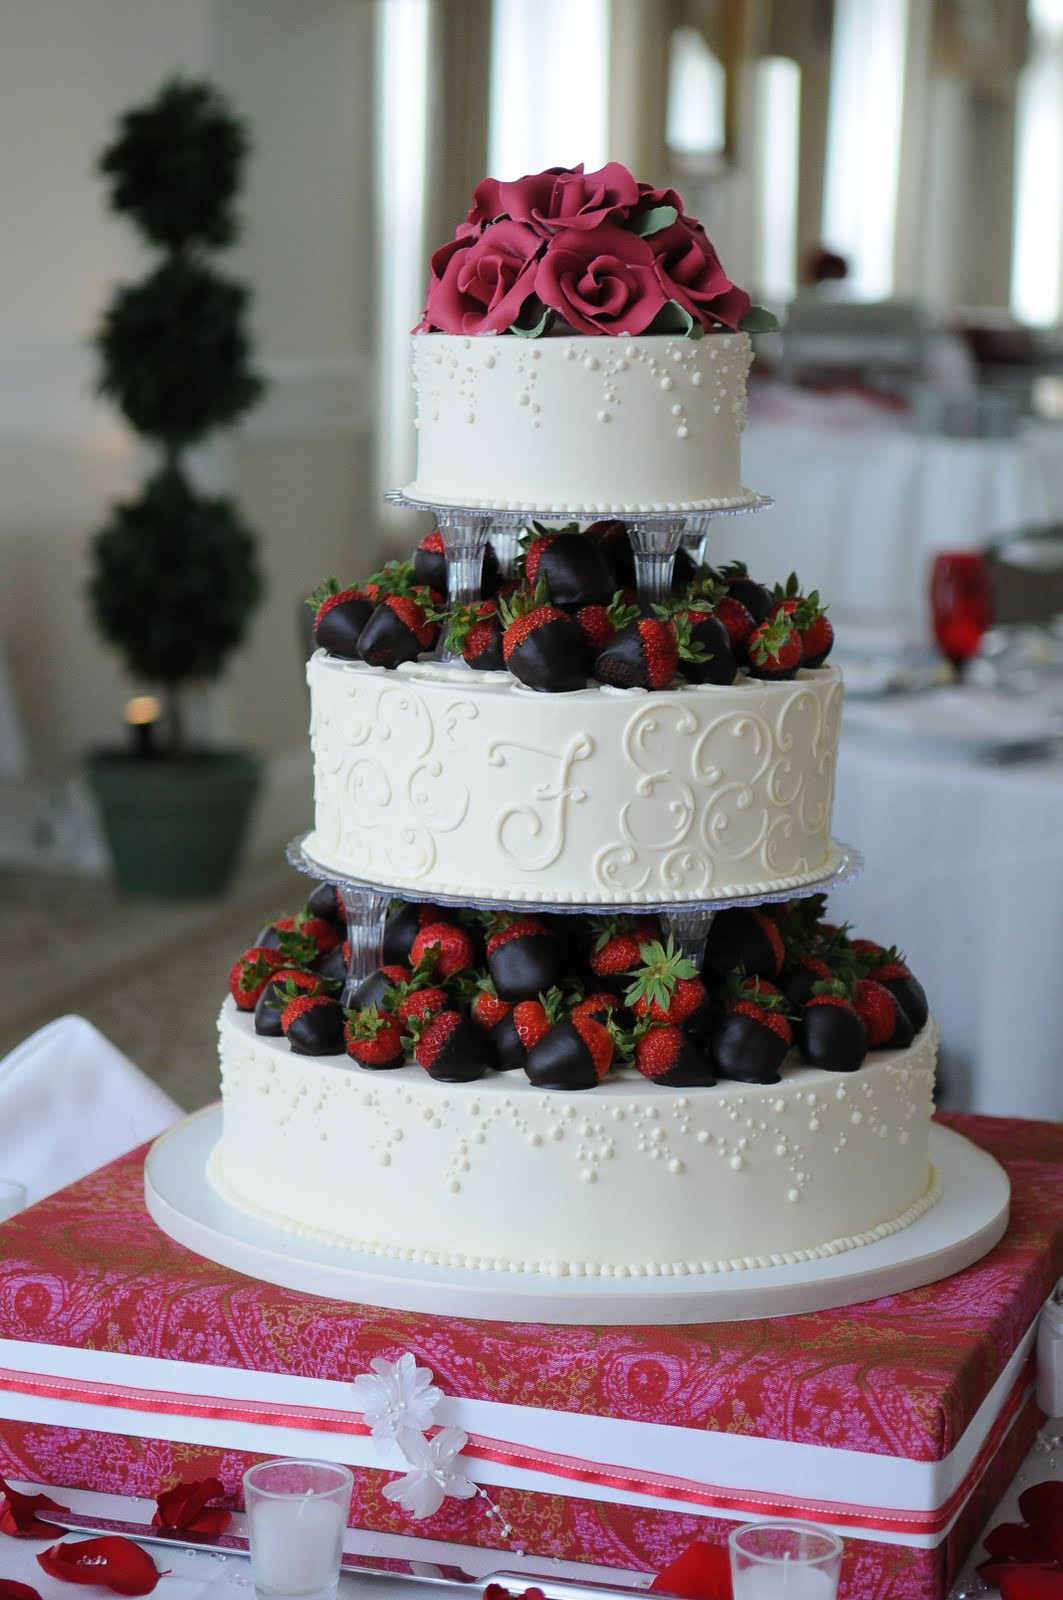 Wedding Cakes With Strawberries
 Dessert Works Bakery Chocolate Dipped Strawberries